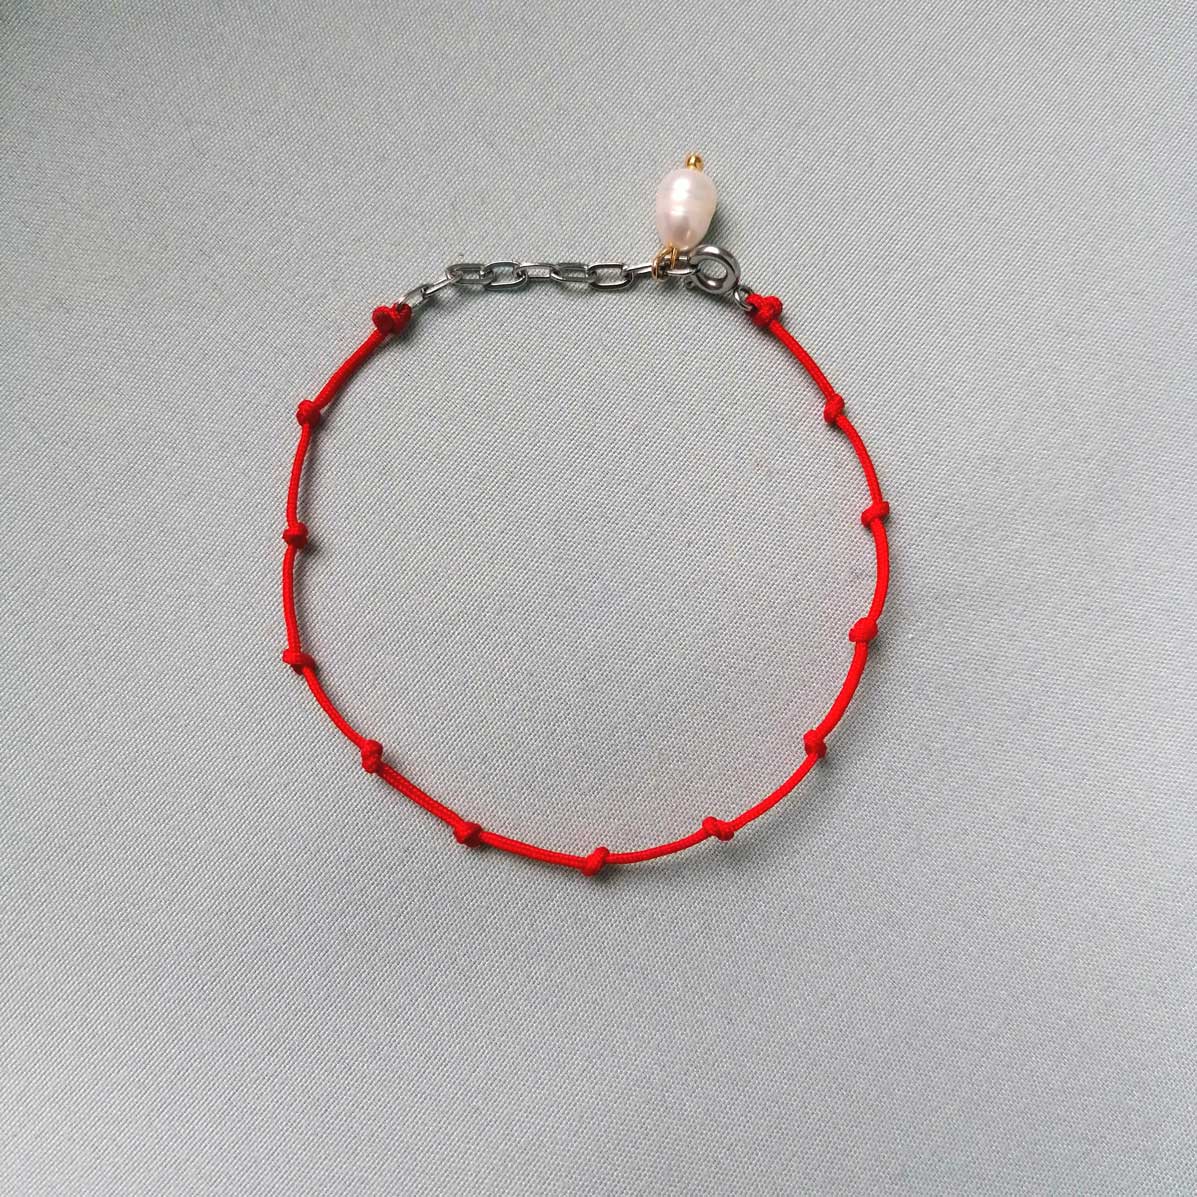 Knotenarmband mit Perle in rot & silber | pia norden